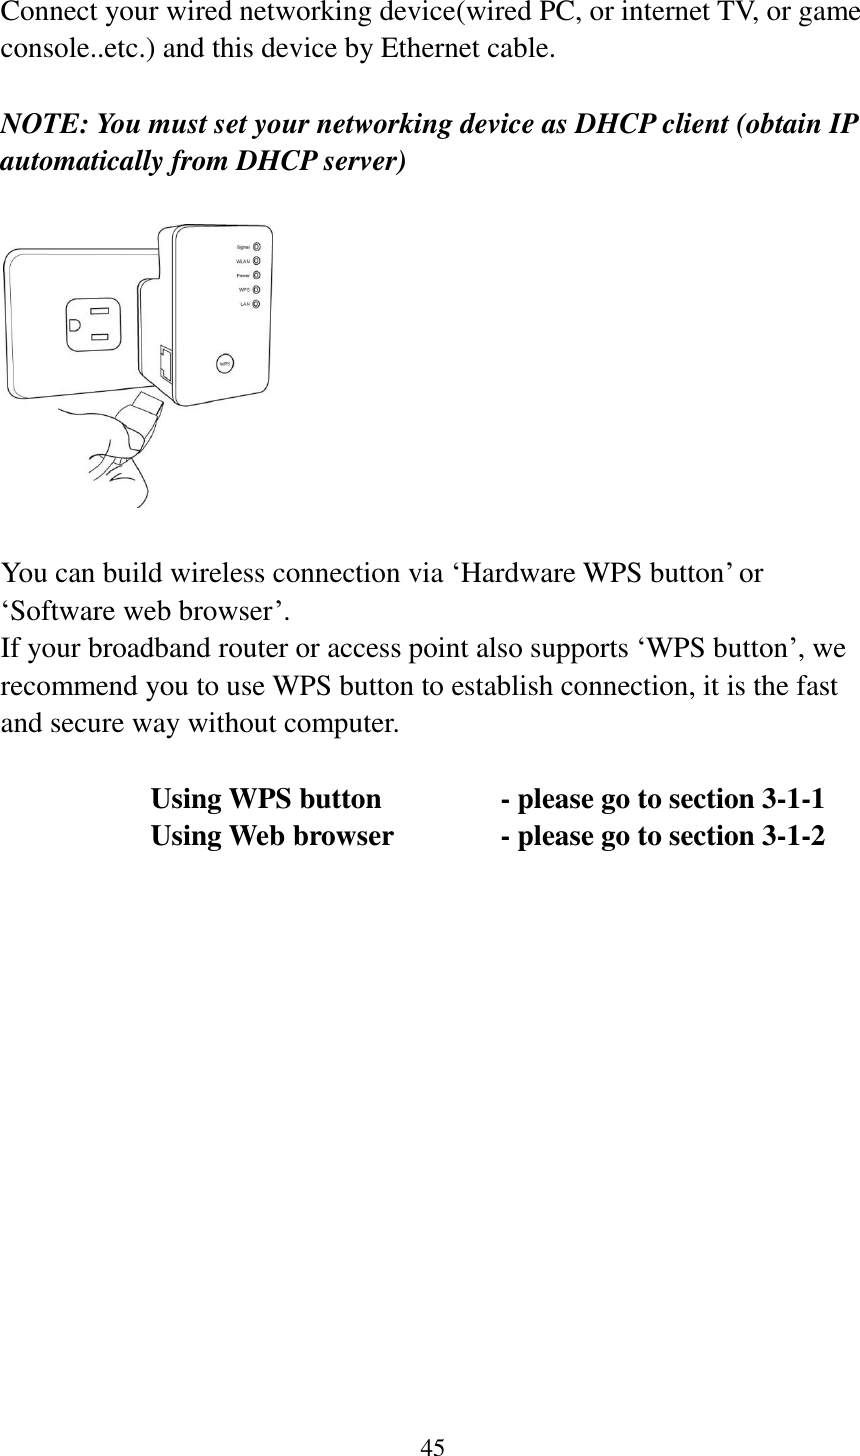 45  Connect your wired networking device(wired PC, or internet TV, or game console..etc.) and this device by Ethernet cable.  NOTE: You must set your networking device as DHCP client (obtain IP automatically from DHCP server)    You can build wireless connection via „Hardware WPS button‟ or „Software web browser‟. If your broadband router or access point also supports „WPS button‟, we recommend you to use WPS button to establish connection, it is the fast and secure way without computer.    Using WPS button      - please go to section 3-1-1       Using Web browser     - please go to section 3-1-2     